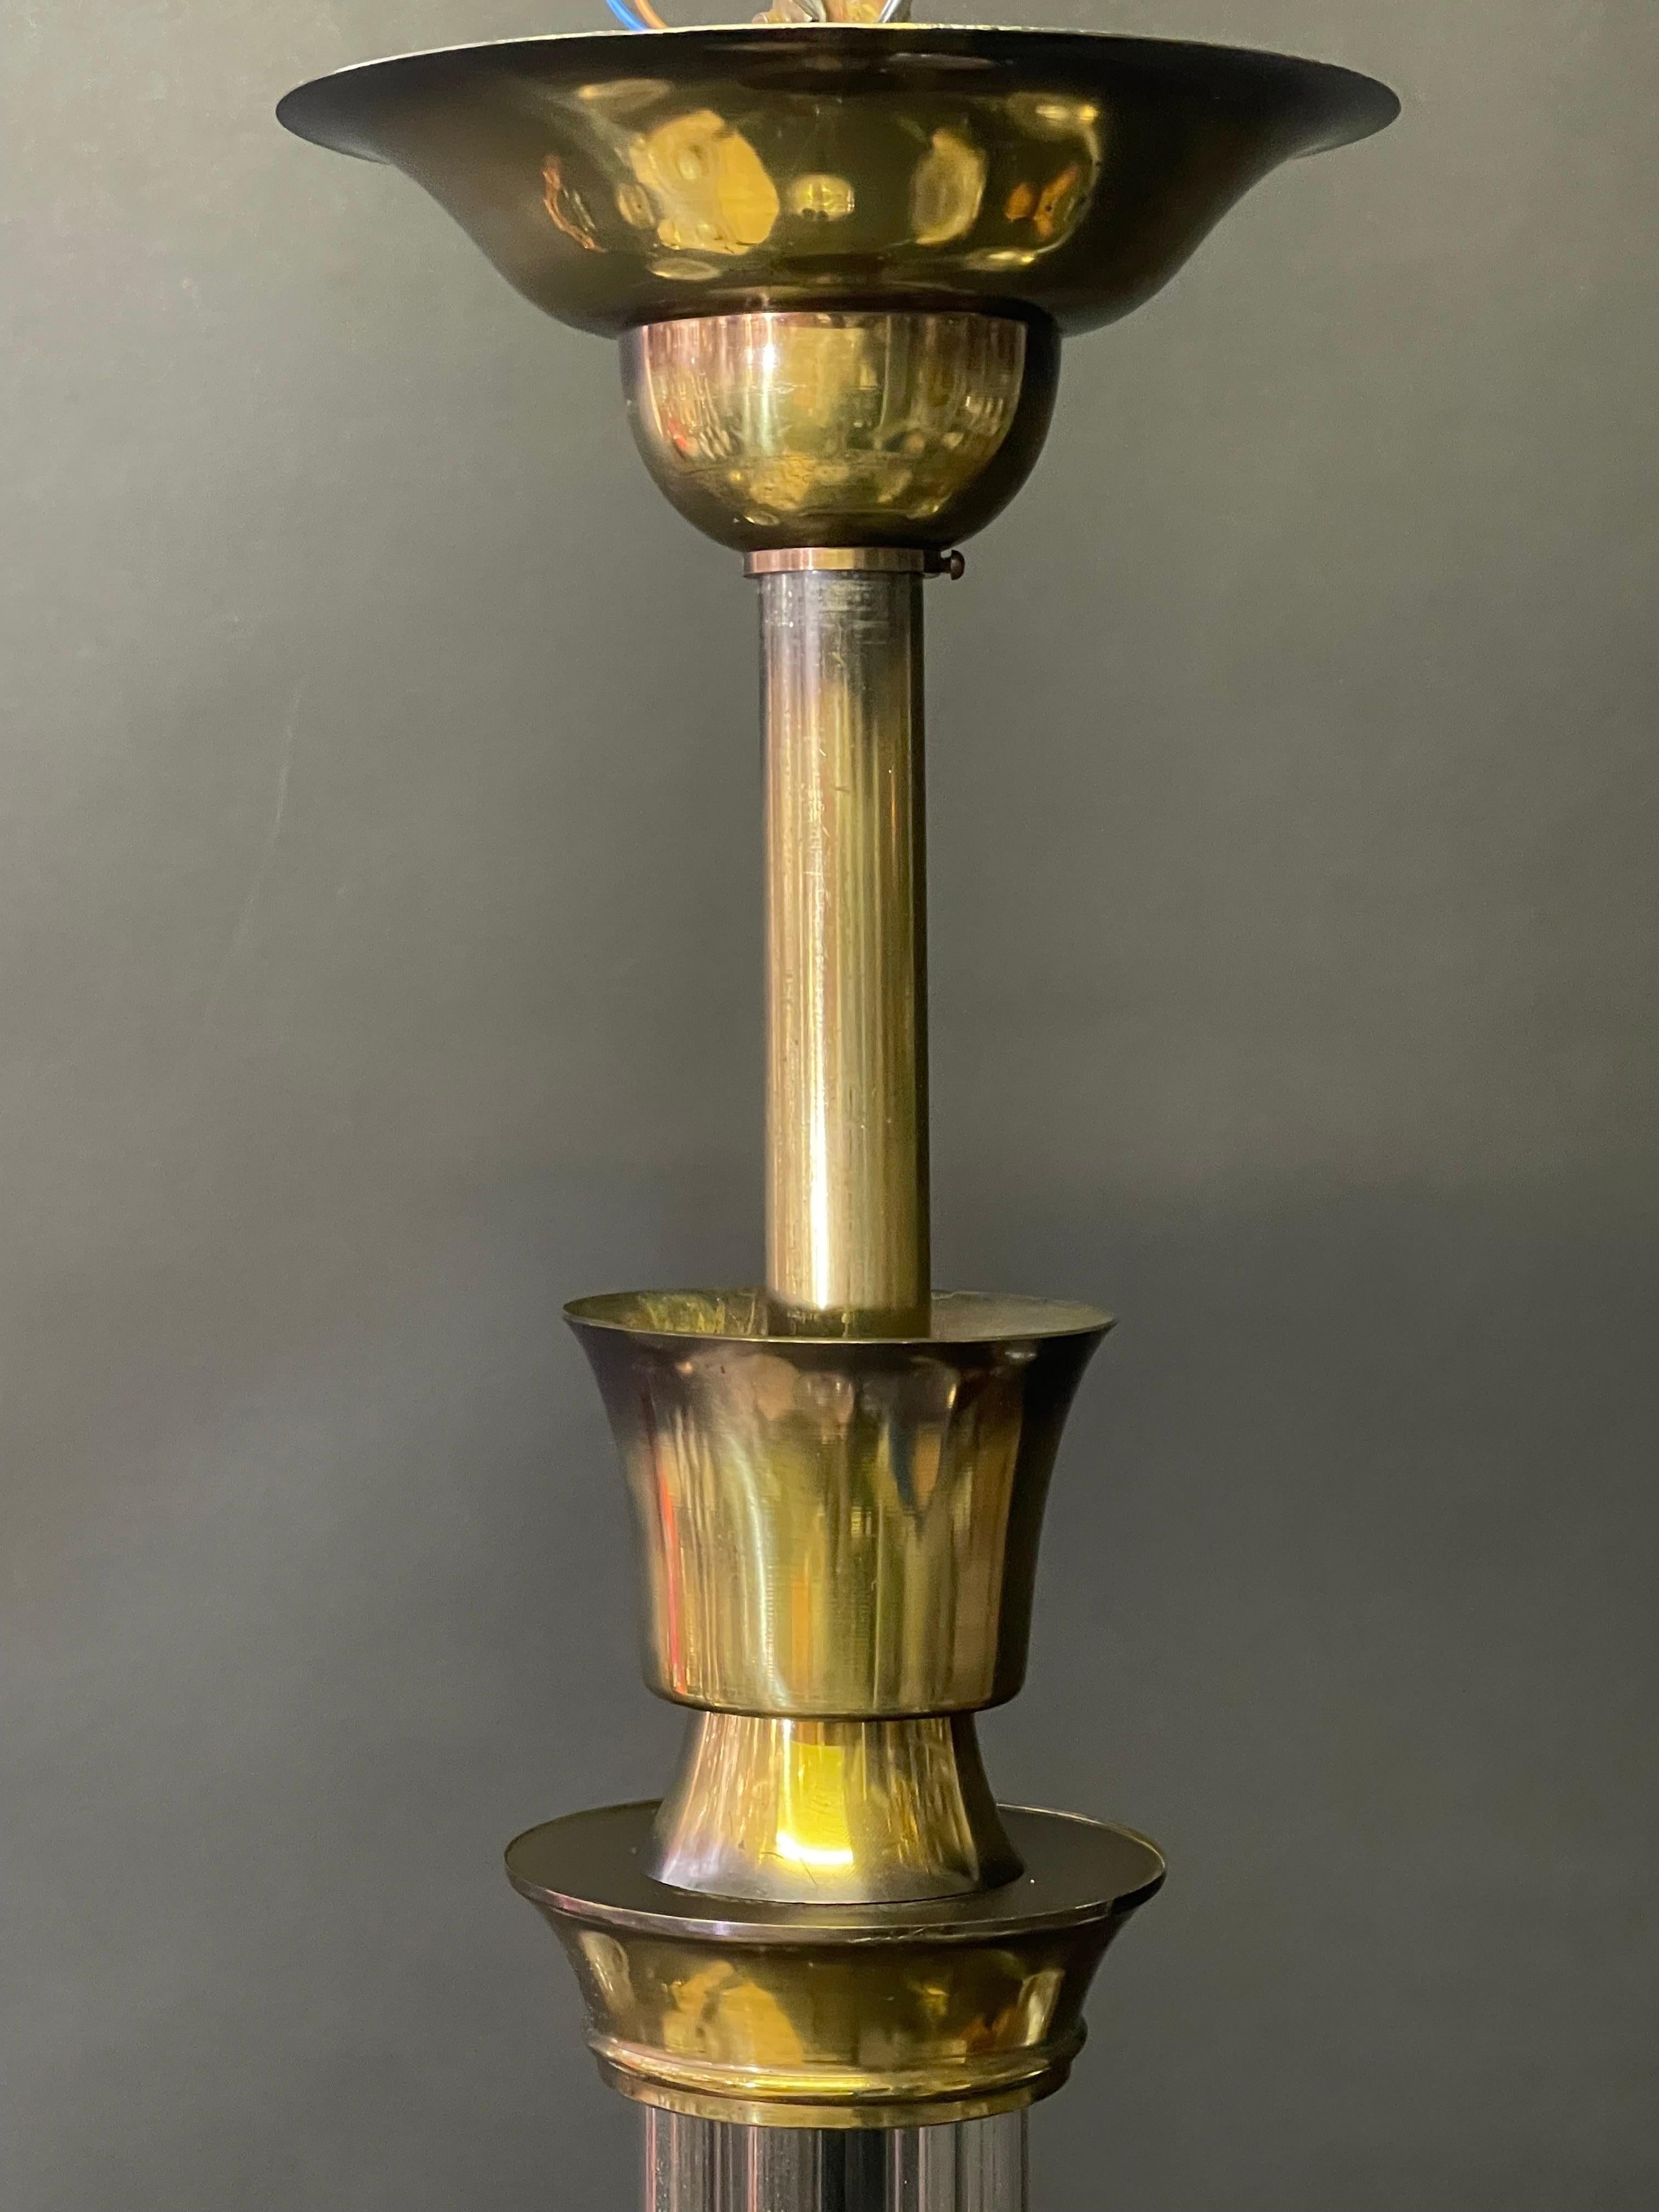 French Art Deco Chandelier Petitot Style Bronze, circa 1930s For Sale 2